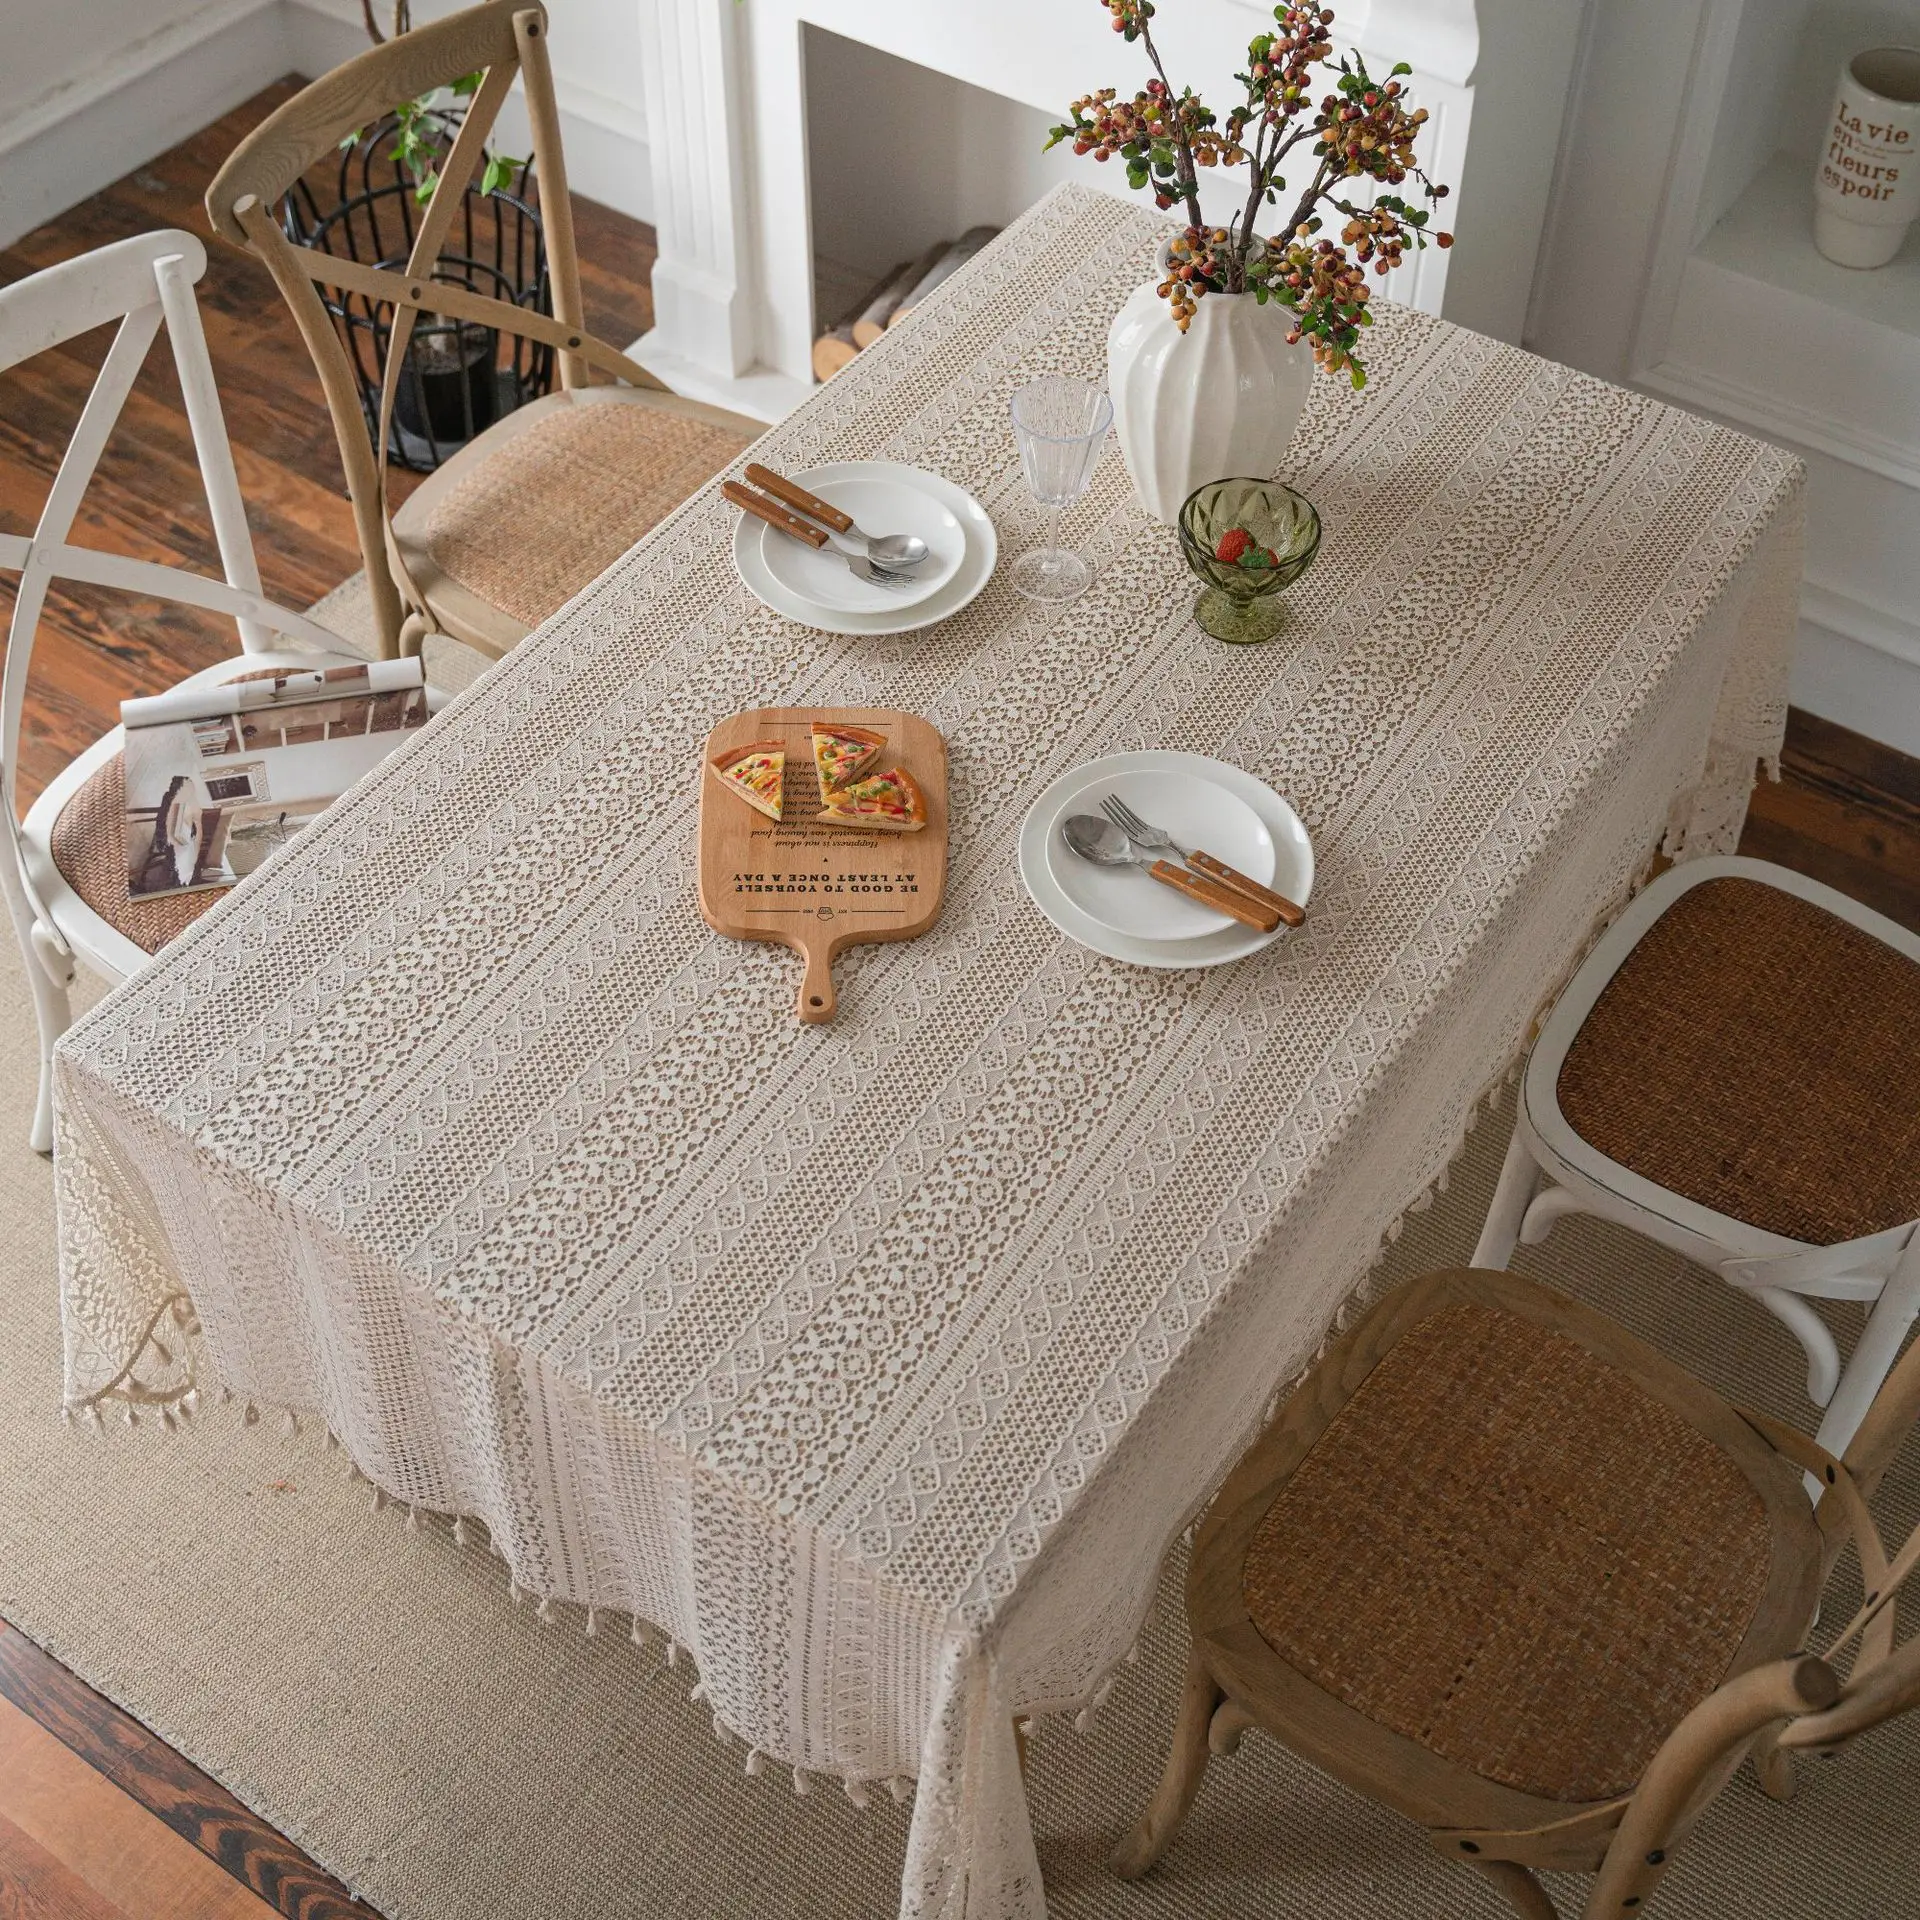 

Beige Polyester Cotton Tablecloth, Monochromatic, Crochet Hollowed Out, Broom Tassels, American Rural Style, Tablecover